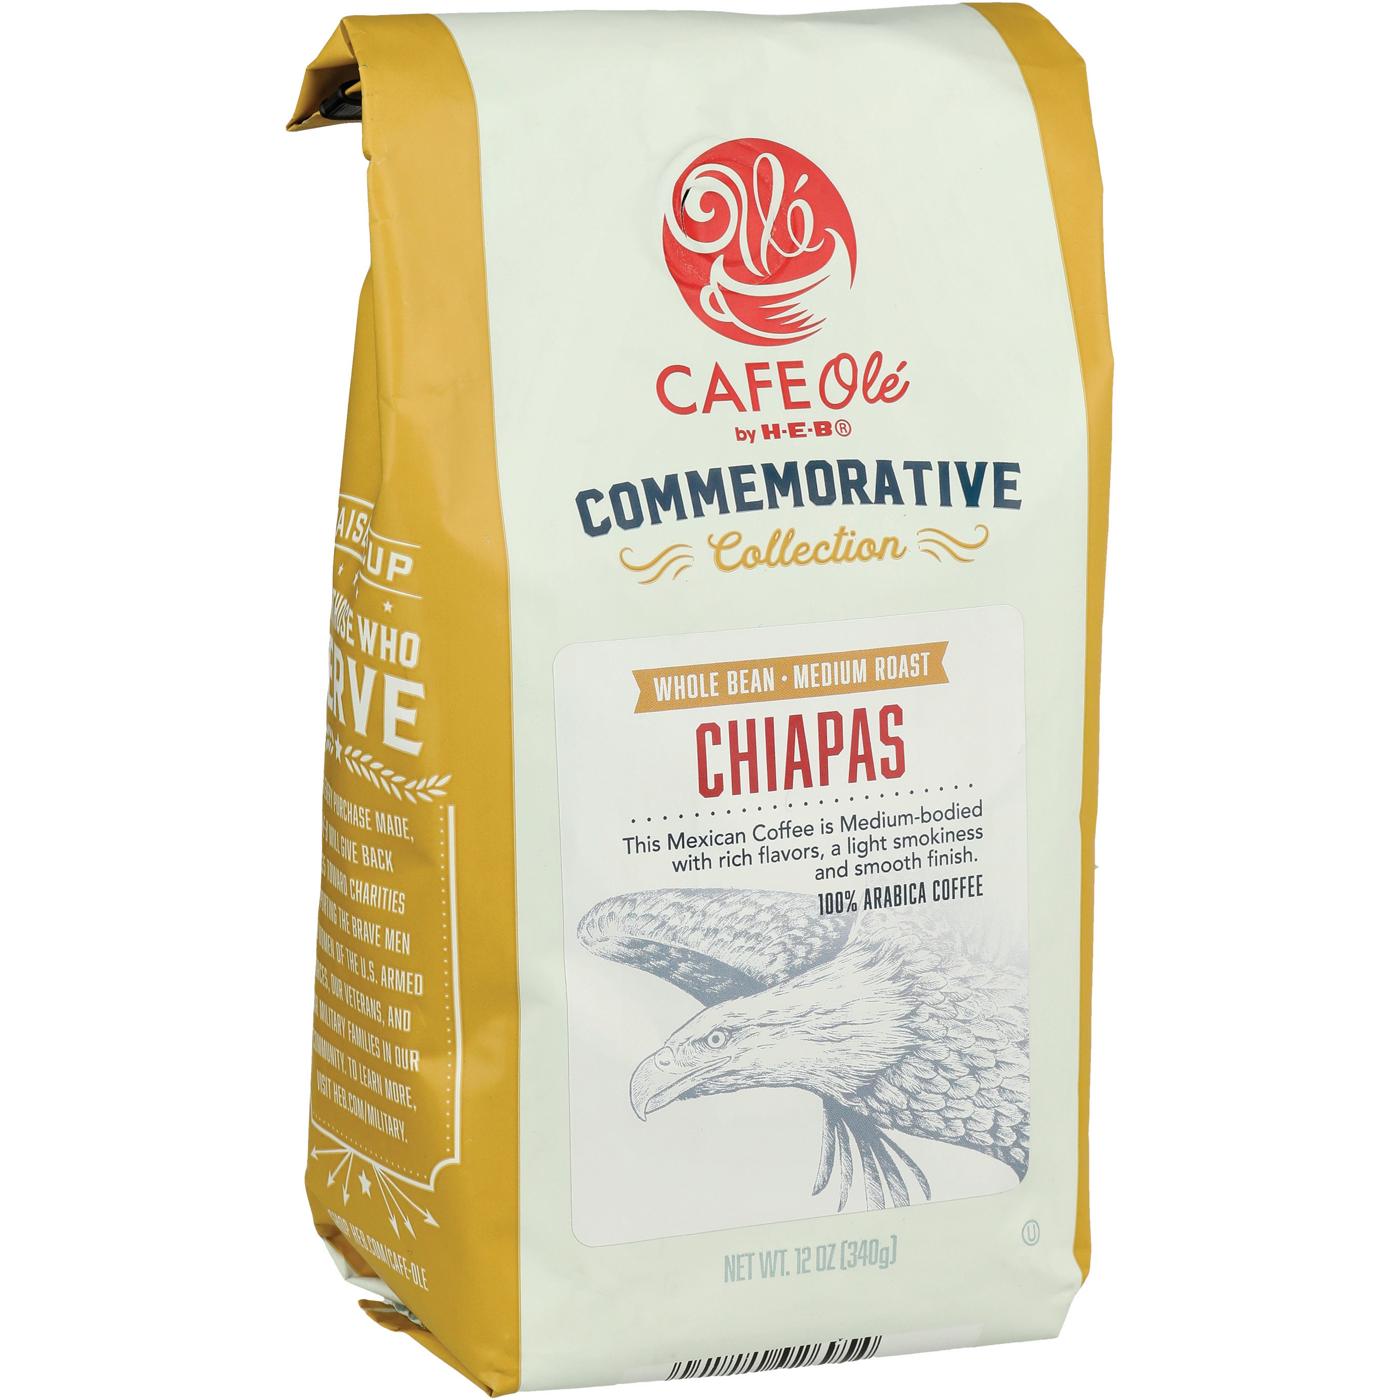 CAFE Olé by H-E-B Commemorative Collection Whole Bean Medium Roast Chiapas Coffee; image 2 of 2